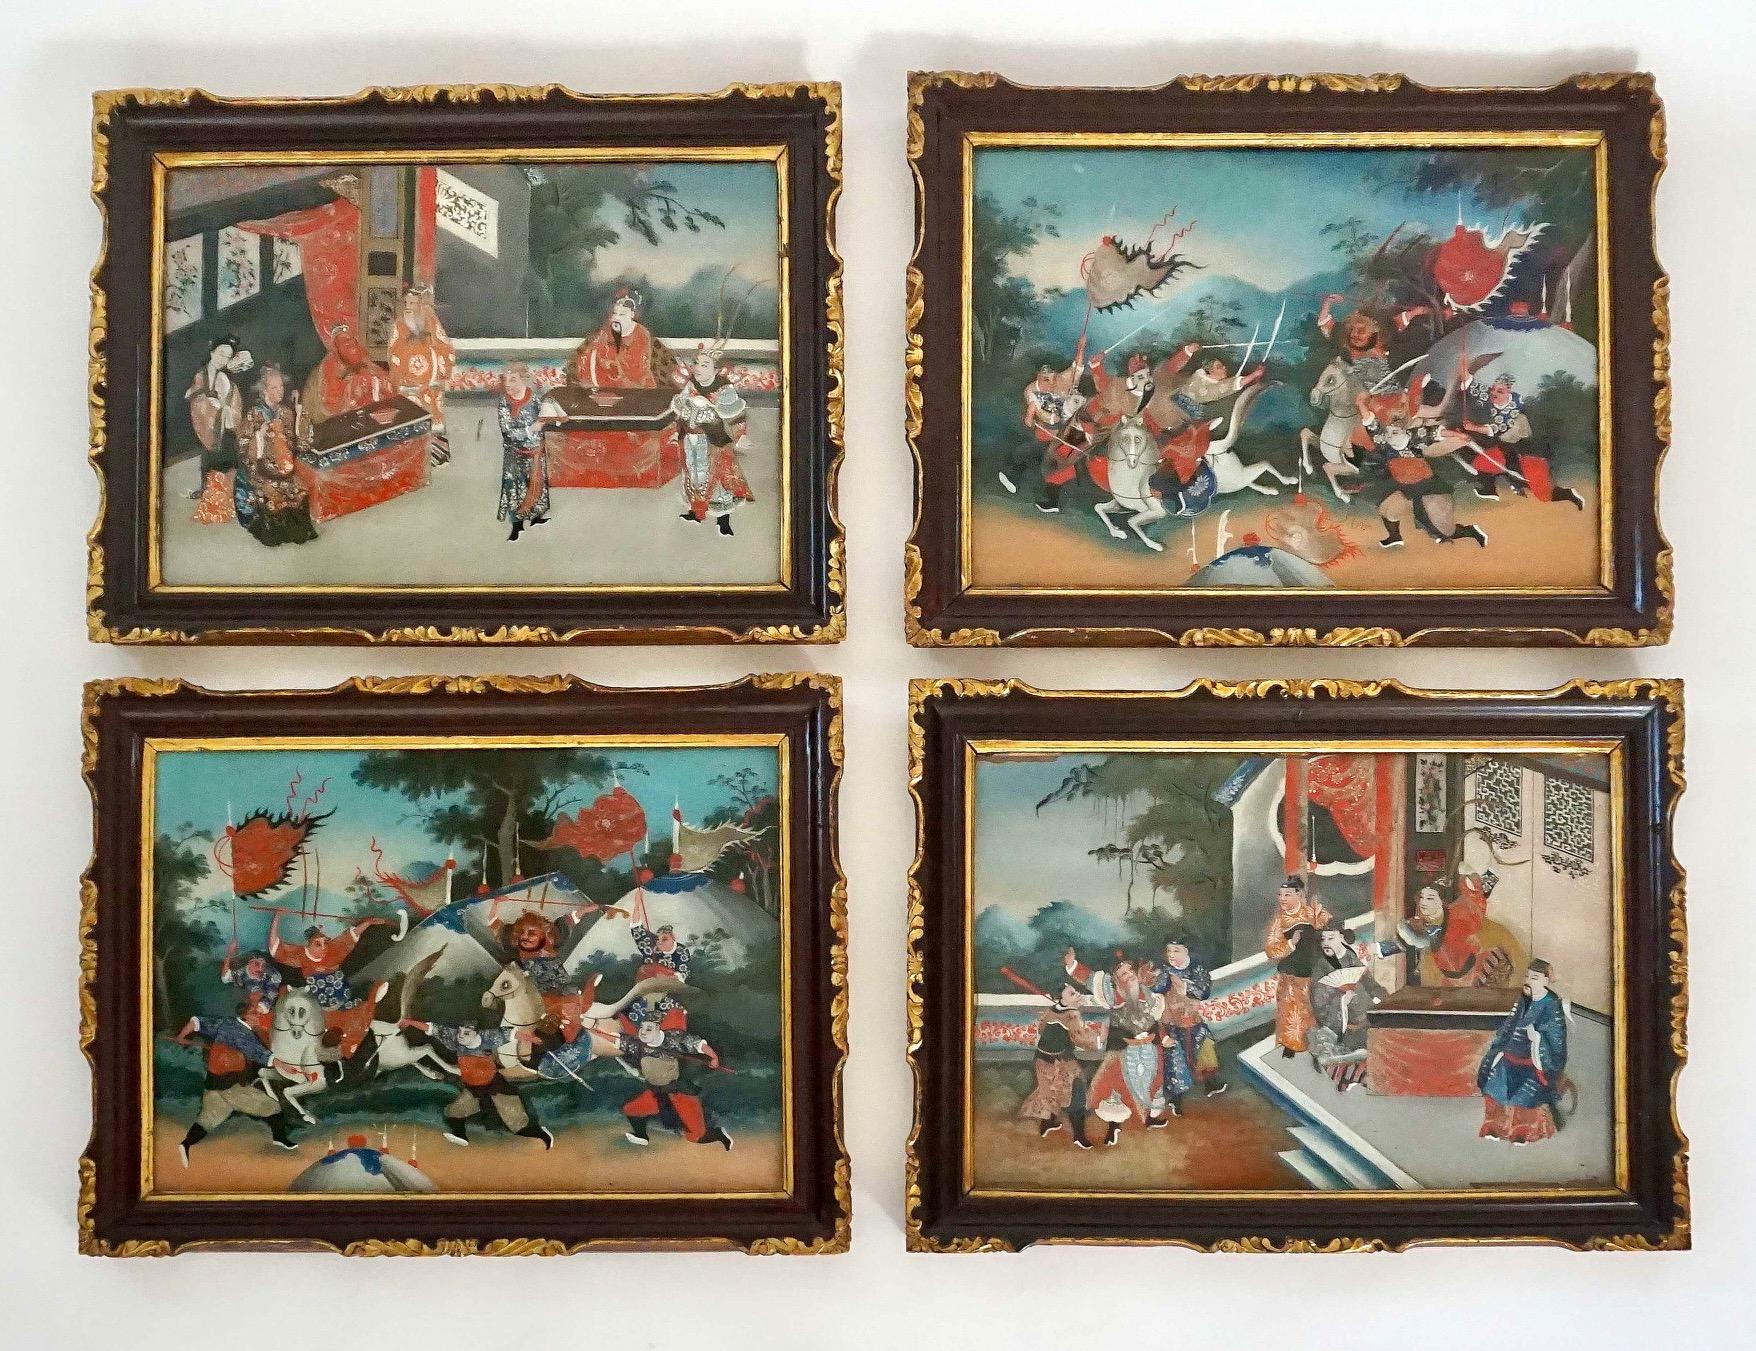 A set of four circa 1825 Chinese Export polychrome reverse glass paintings comprised of figural court views and battle scenes in original 'Chinese Chippendale' parcel-gilt aubergine lacquer frames and reverse backboards. A remarkable and